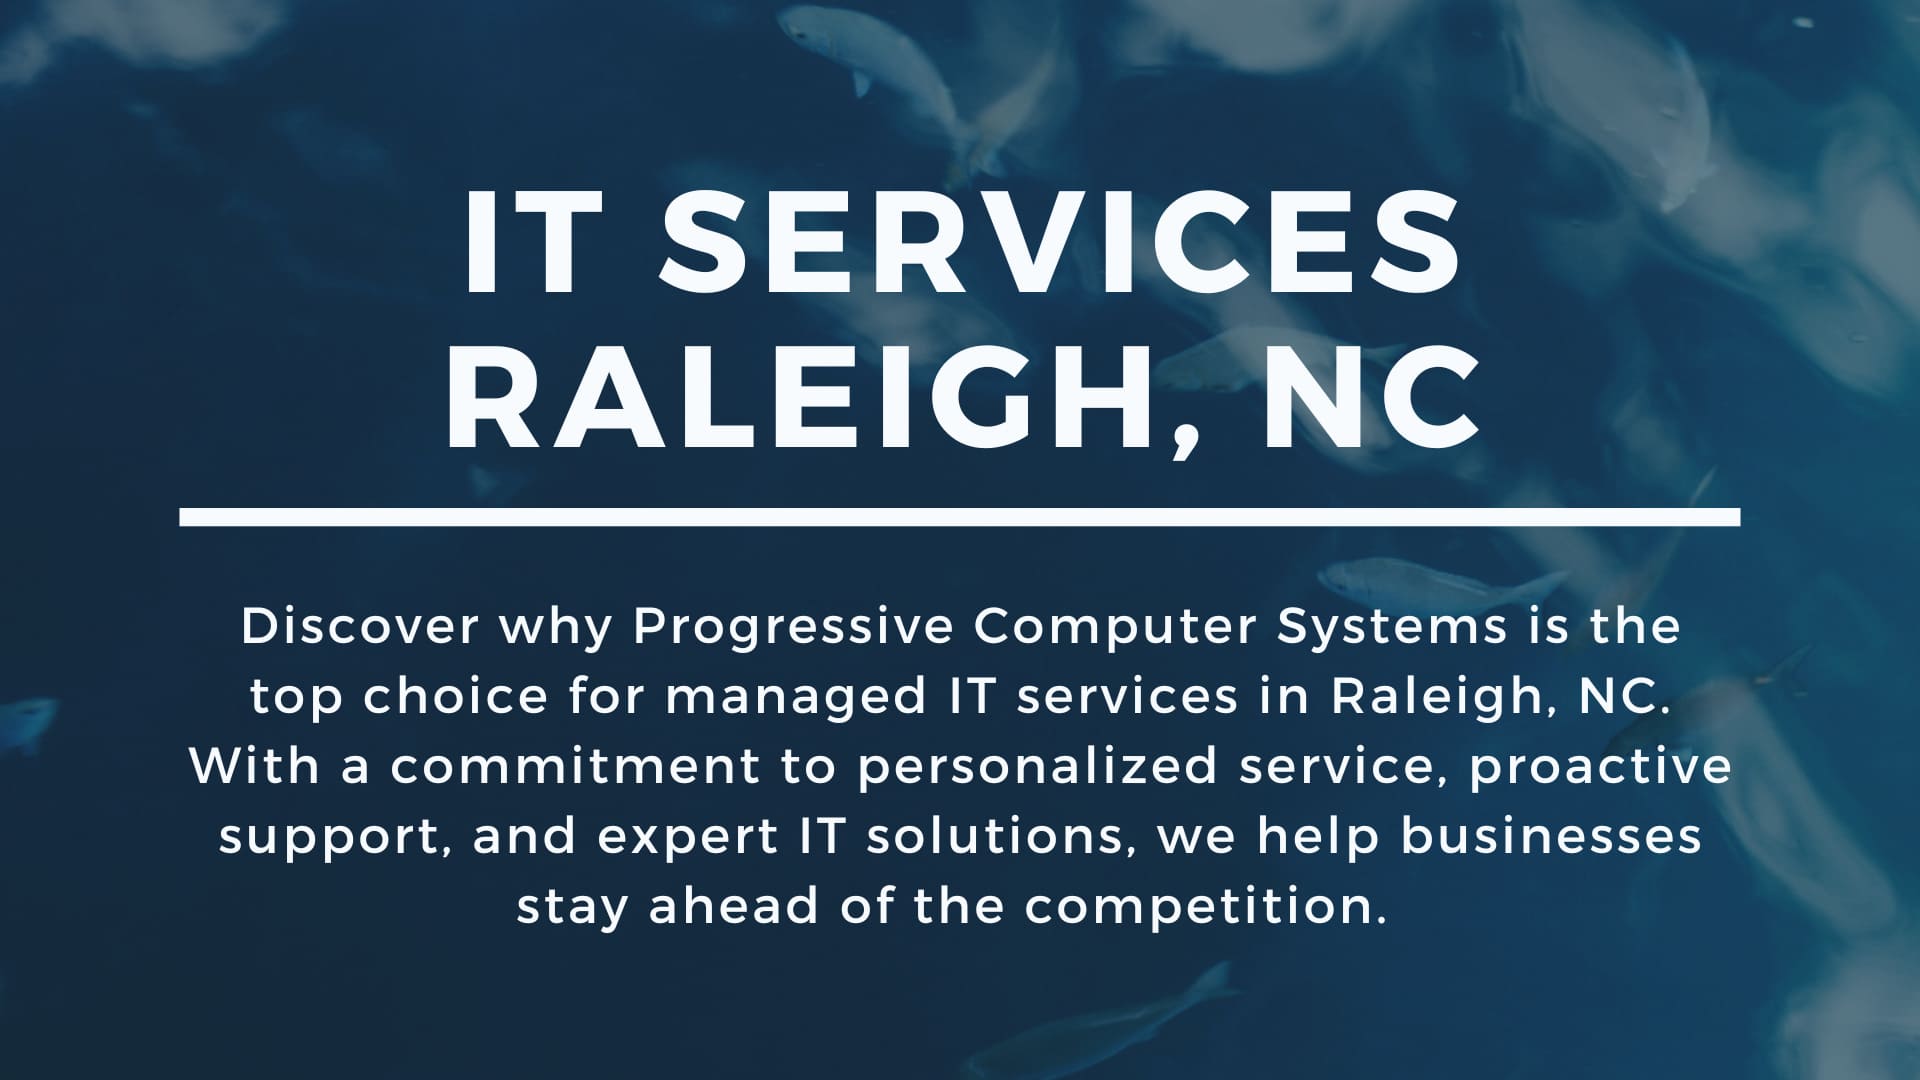 Raleigh IT Services by Progressive Computer Systems